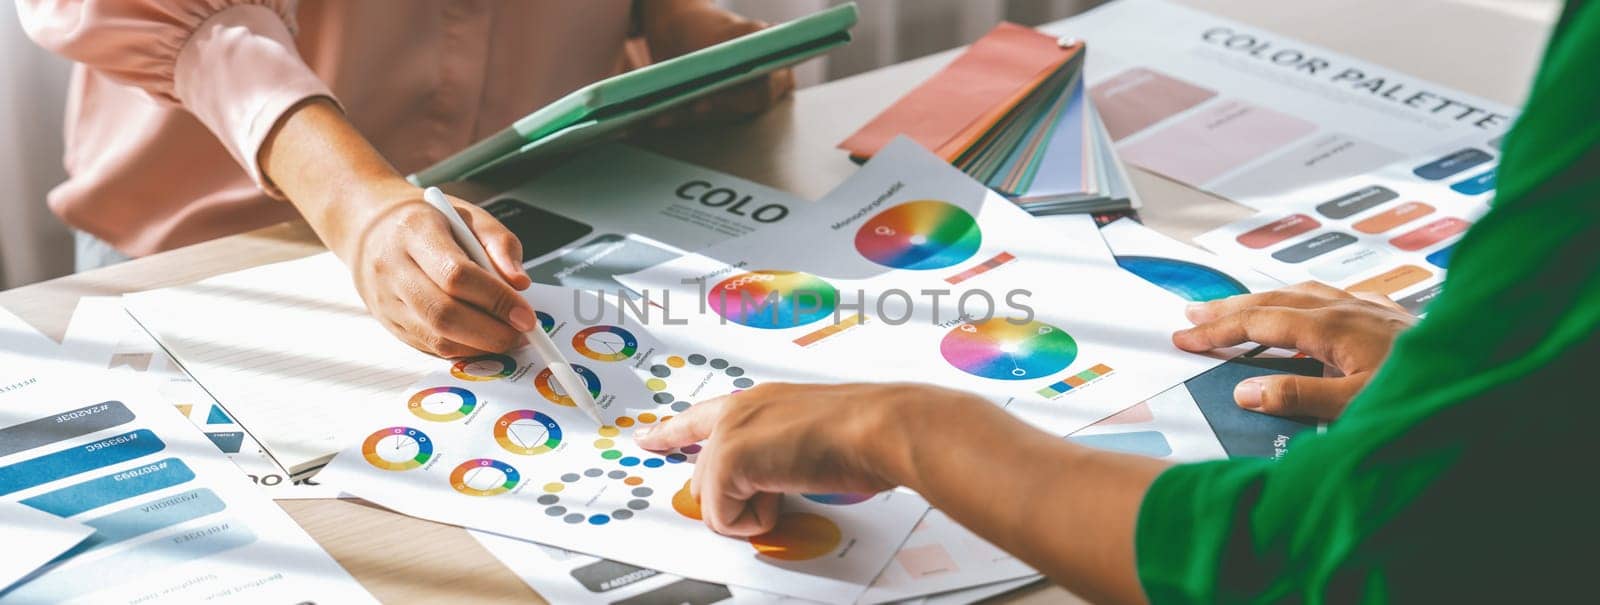 Skilled architect searching data from tablet while selecting an appropriate color from color wheel at table with color palette and document scatter around. Creative design concept. Variegated.